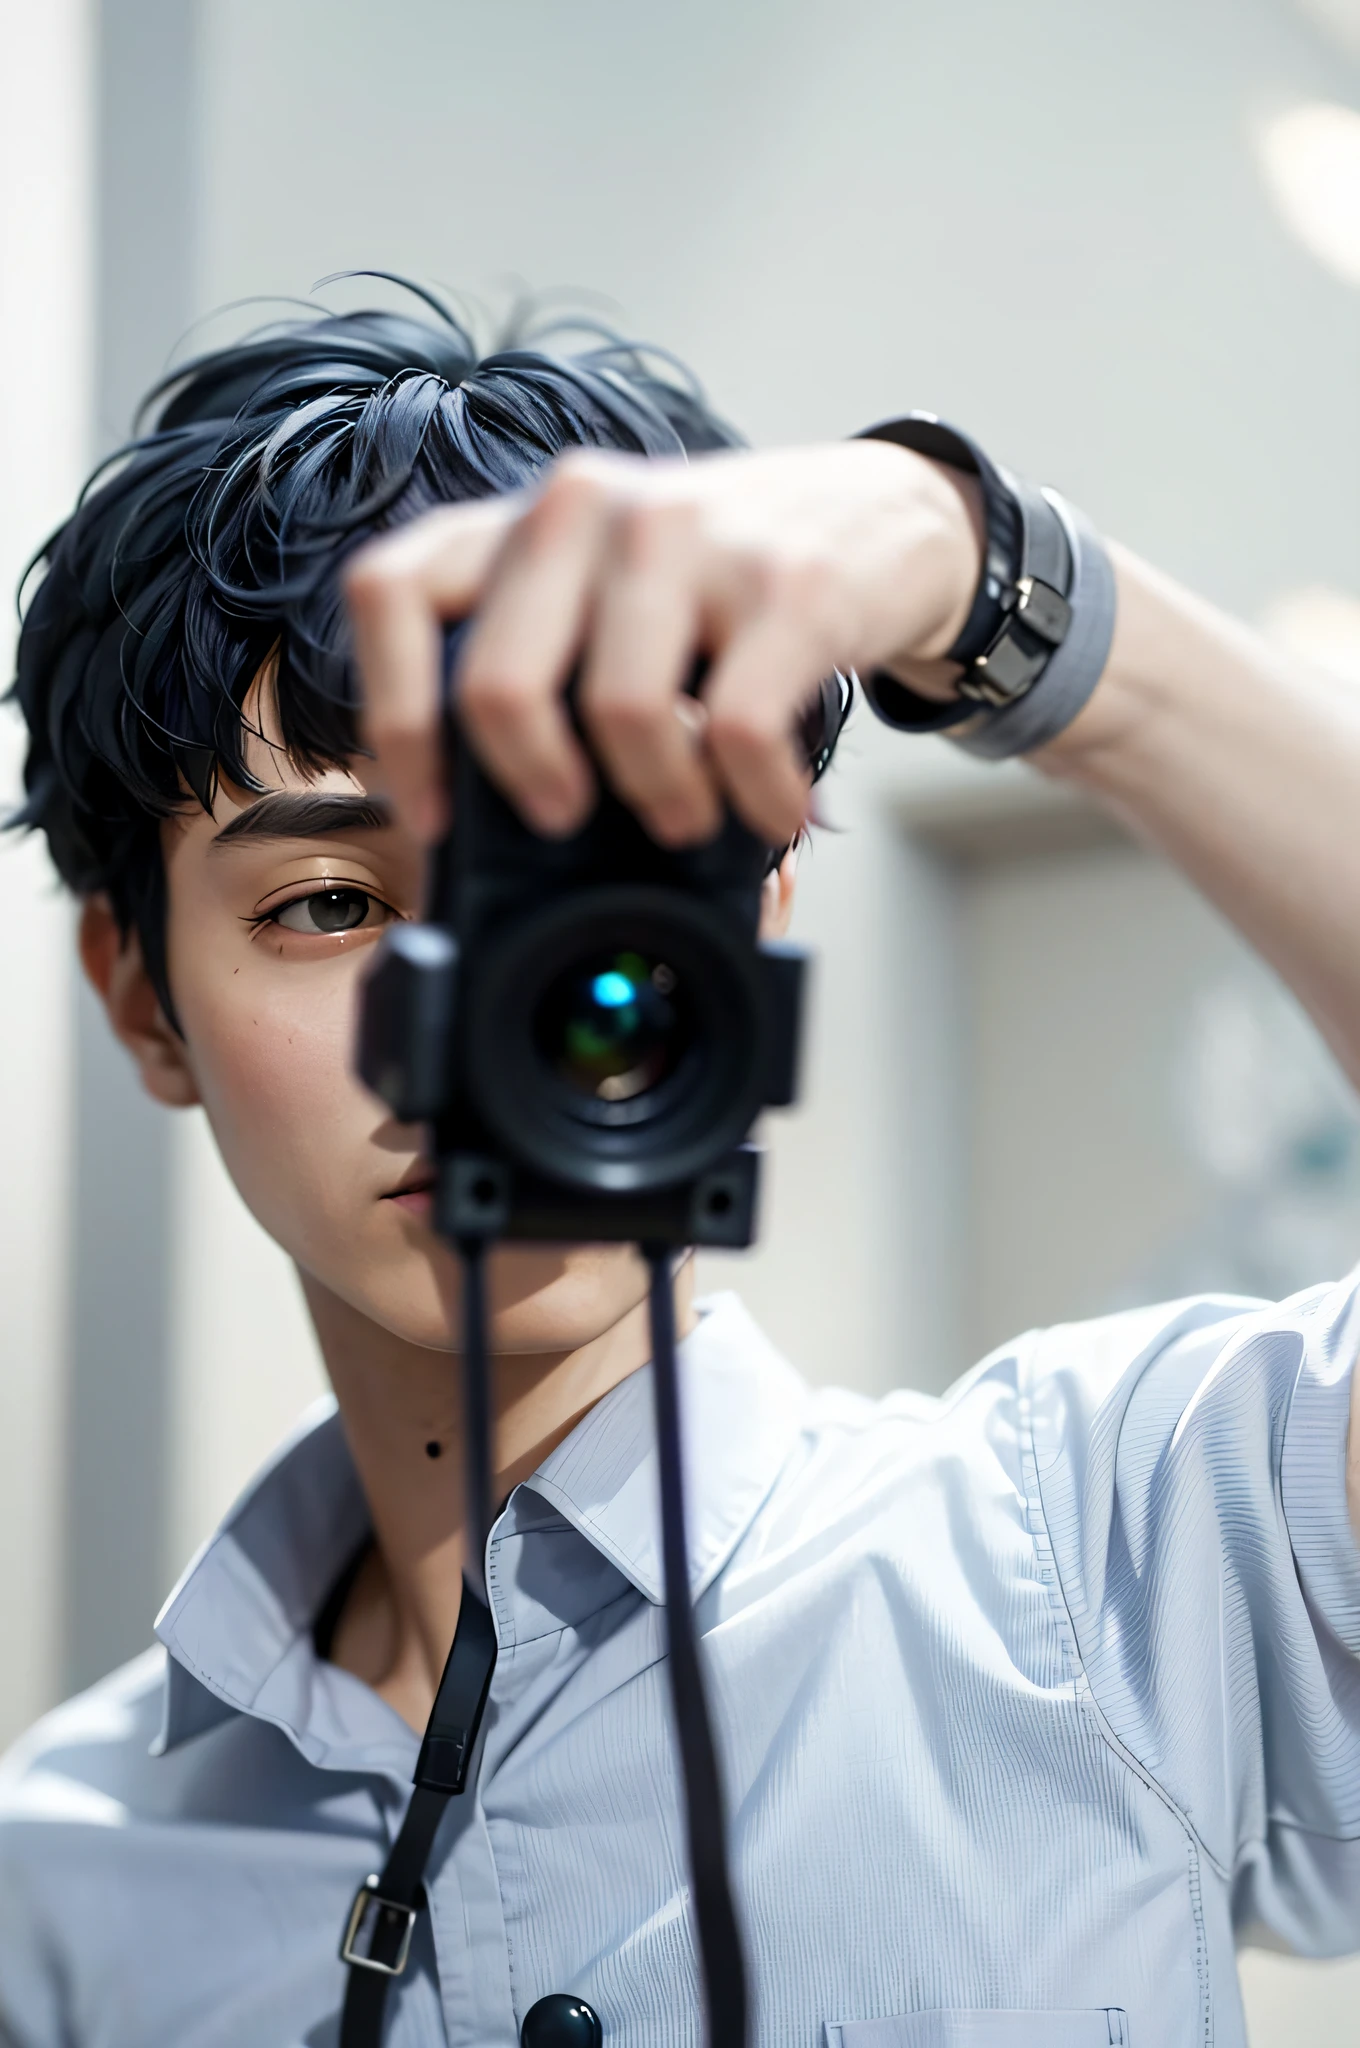 There is a man holding a camera to take a picture, avatar avatar, Potet photo avatar, inspired by Kim Eun-hwan, Kim Do-young, Ren Yihao, [realistic photography], Chen Xintong, Cheng Yanjun, Li Zixin